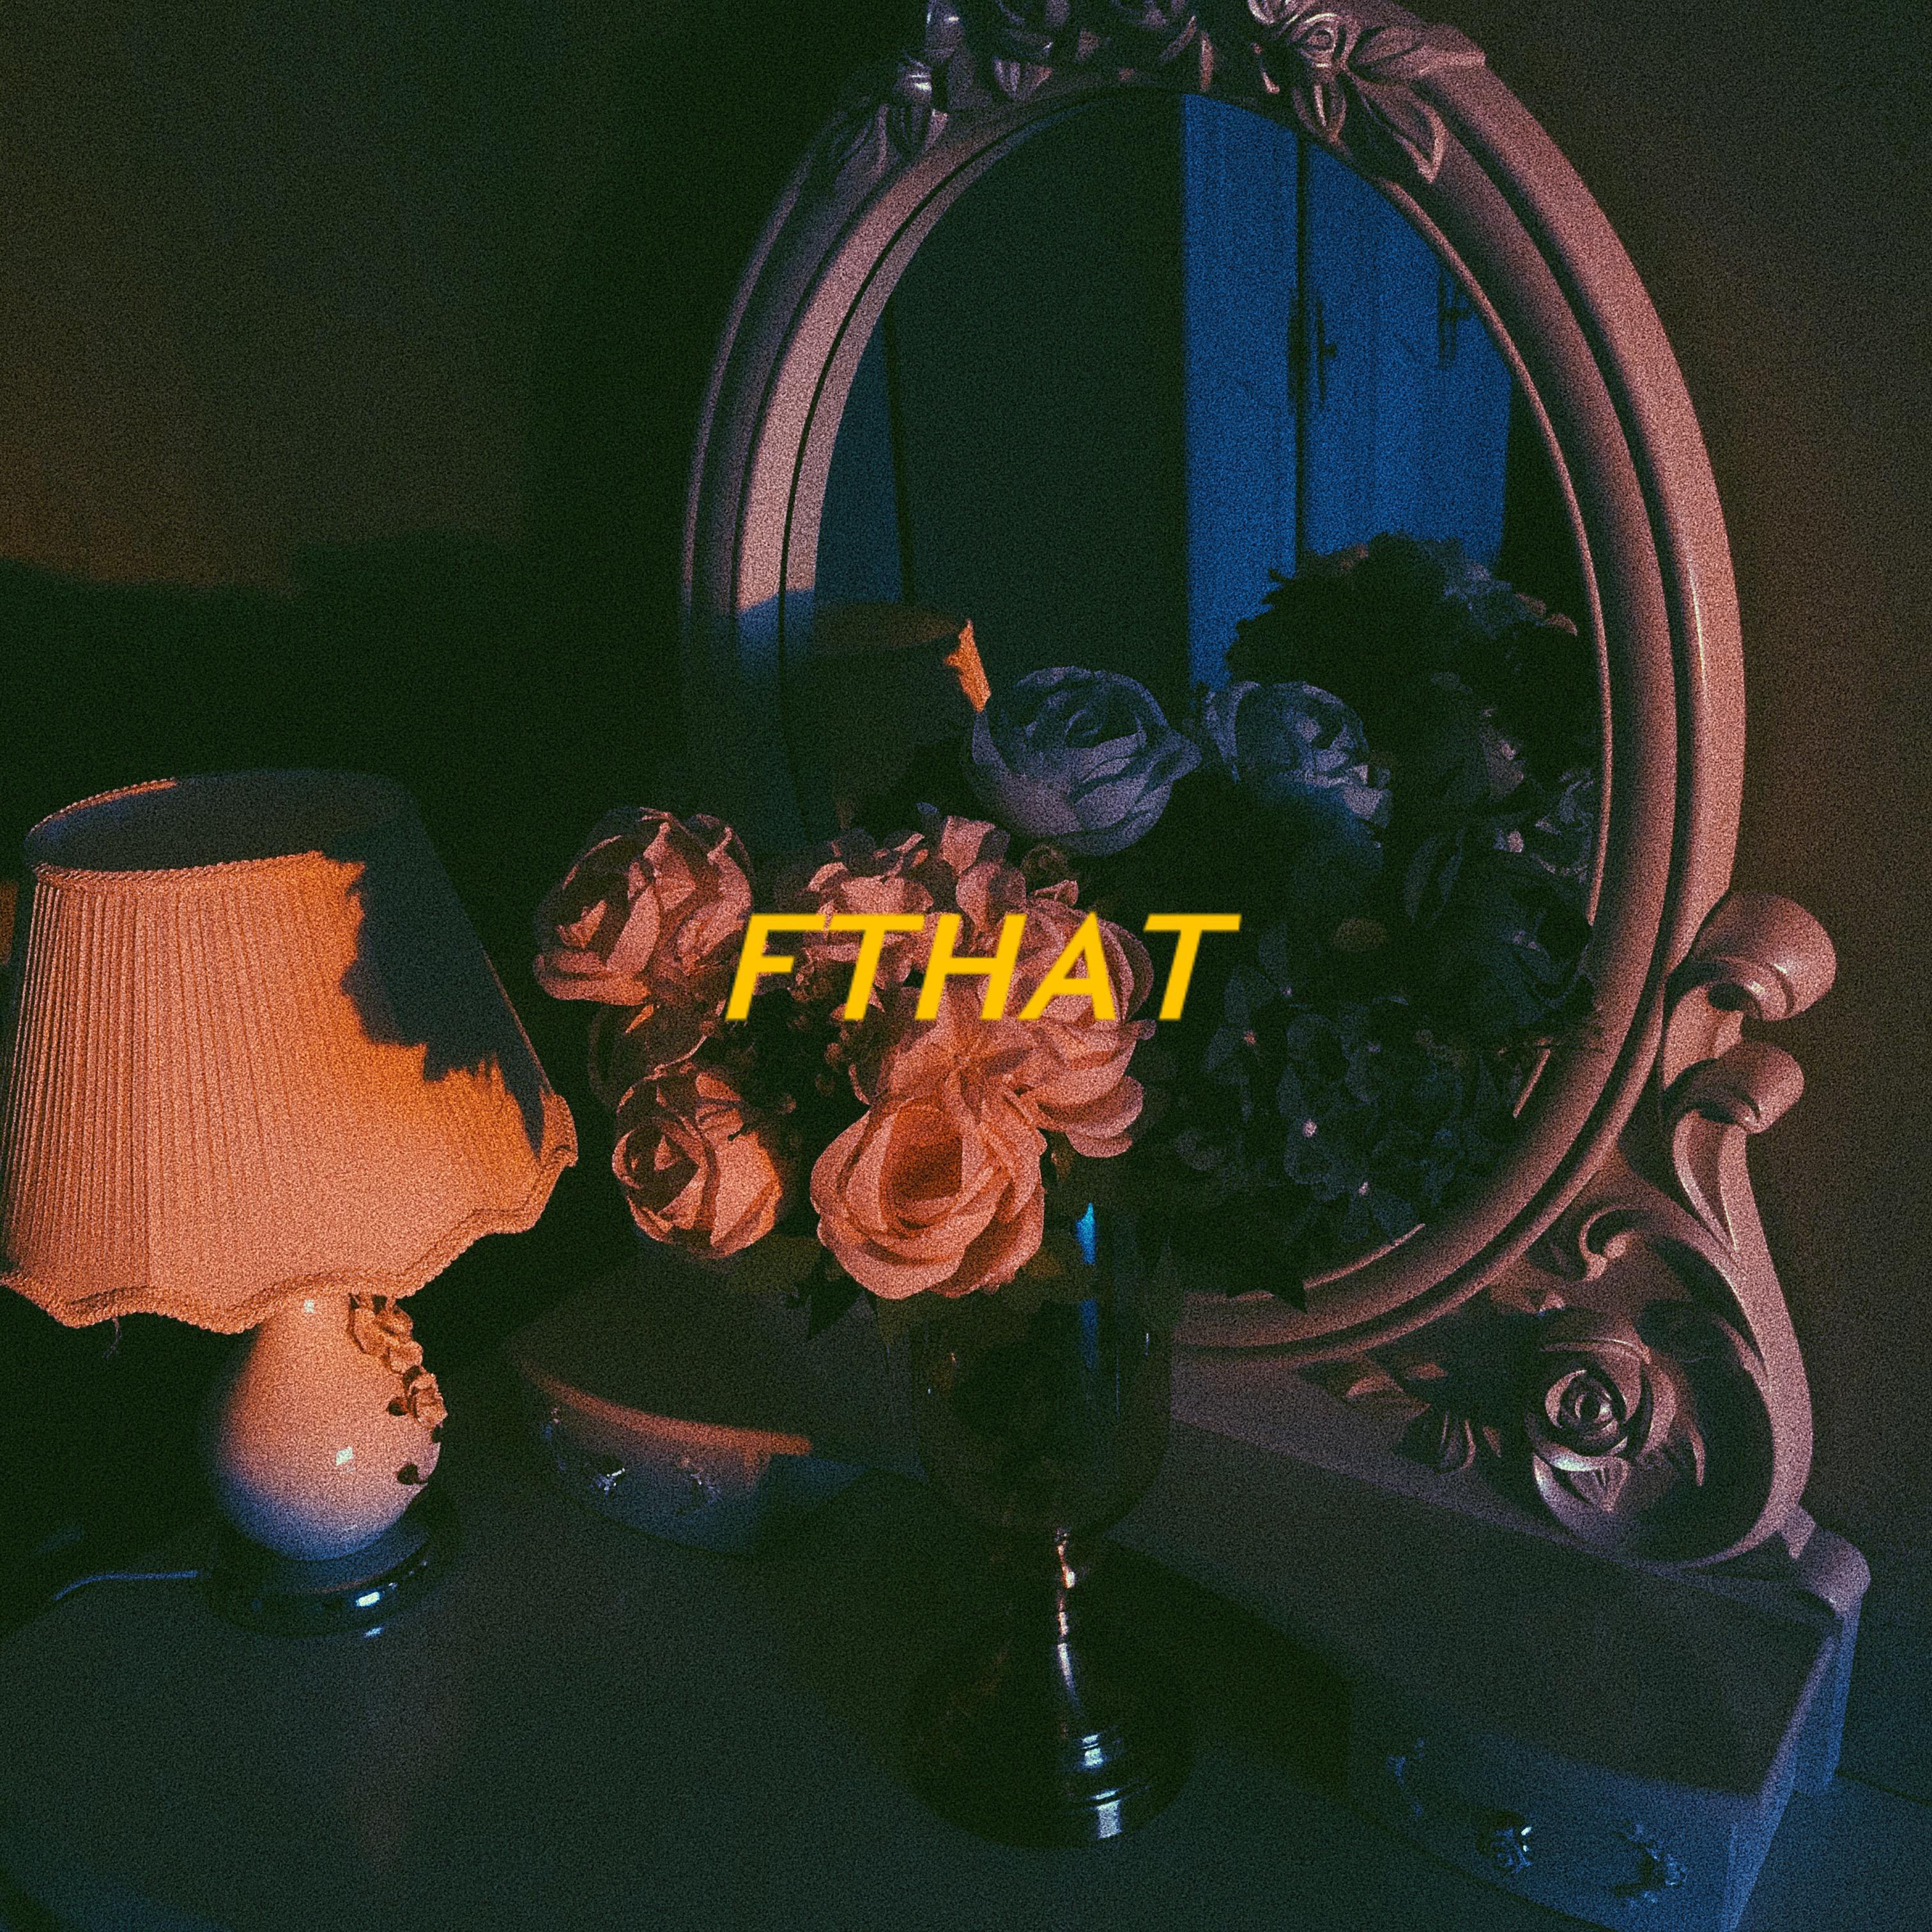 FTHAT - UNKNOWN